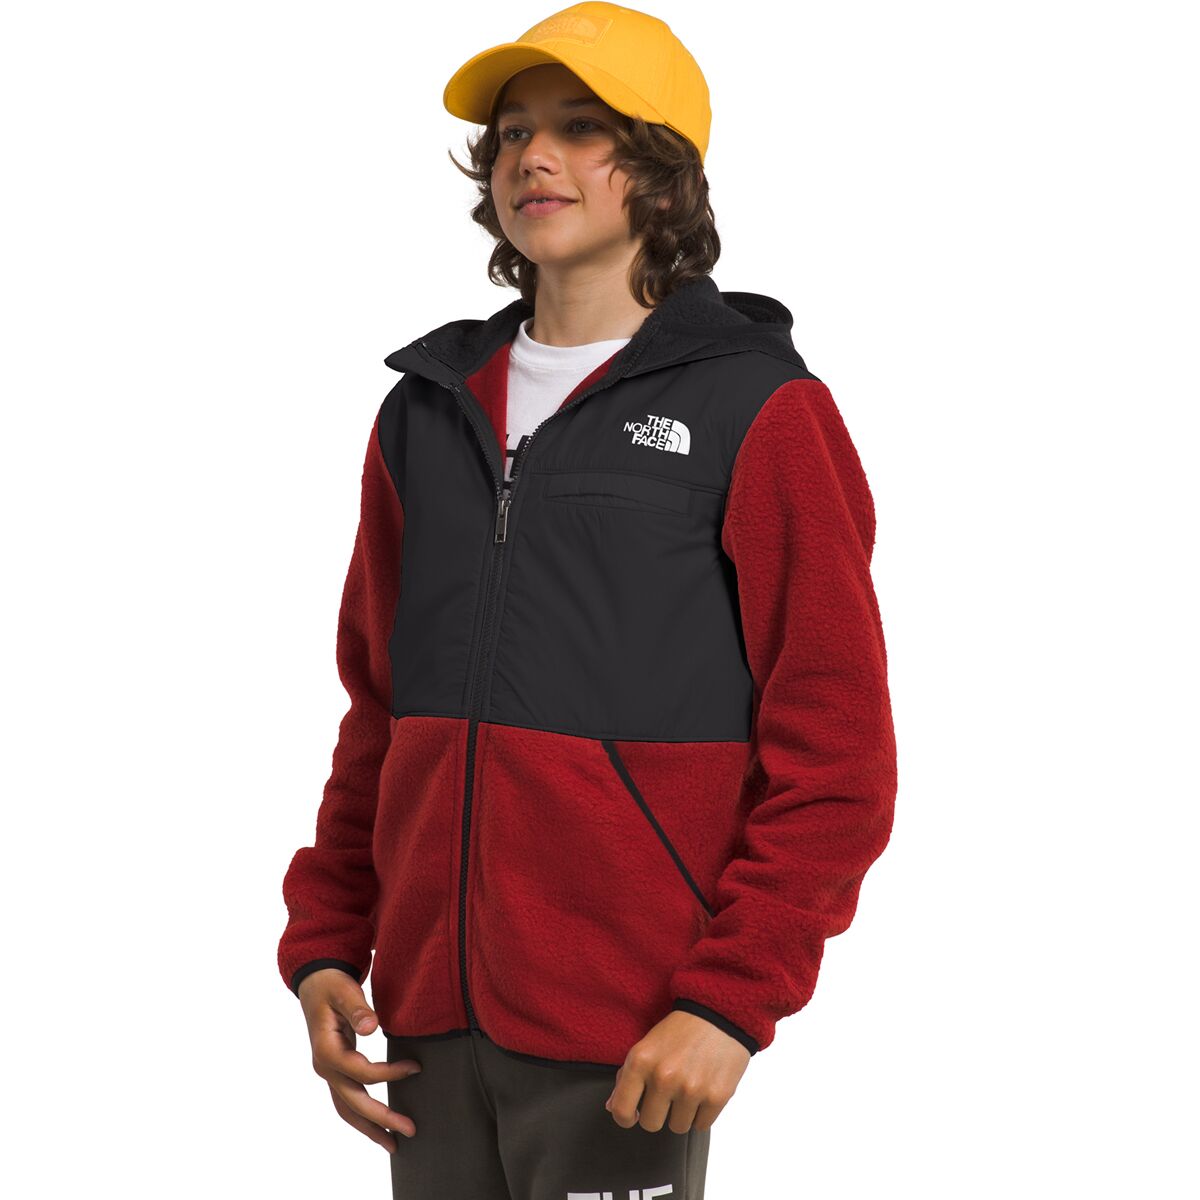 The North Face Forrest Full-Zip Hooded Fleece Jacket - Boys'